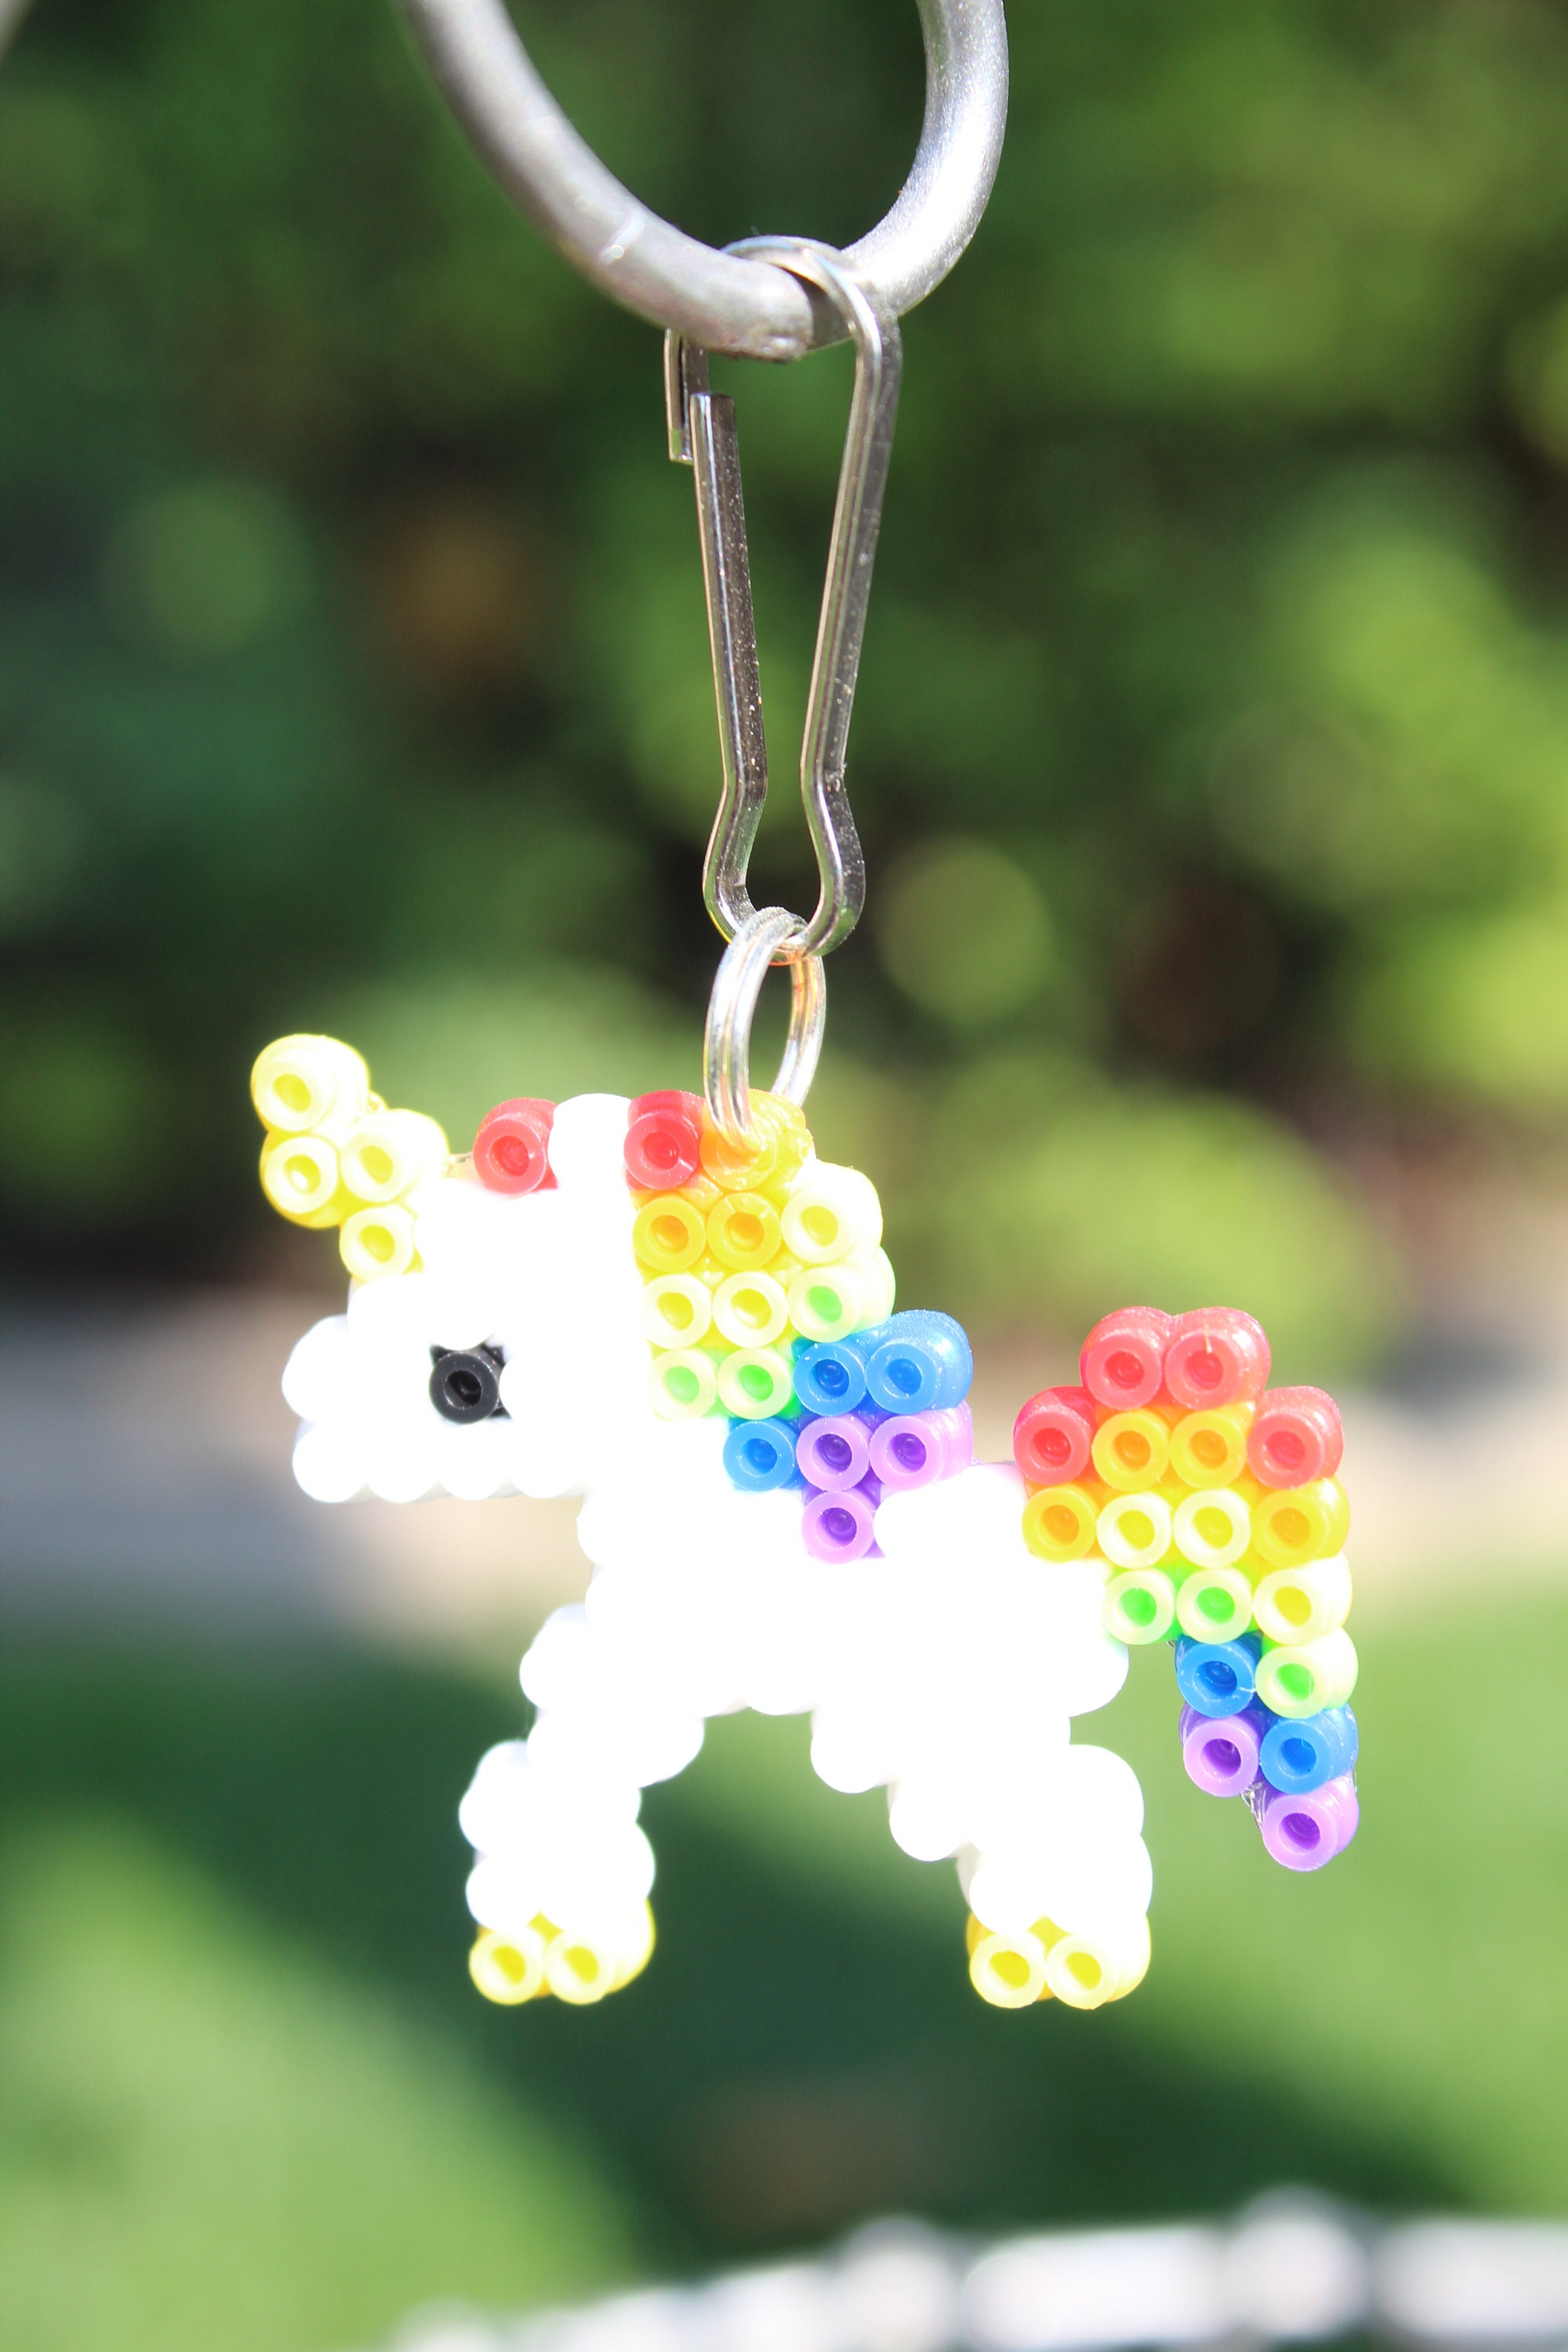 Unicorn Keychain Shape Keychains Decor Hot Pink Accessories for